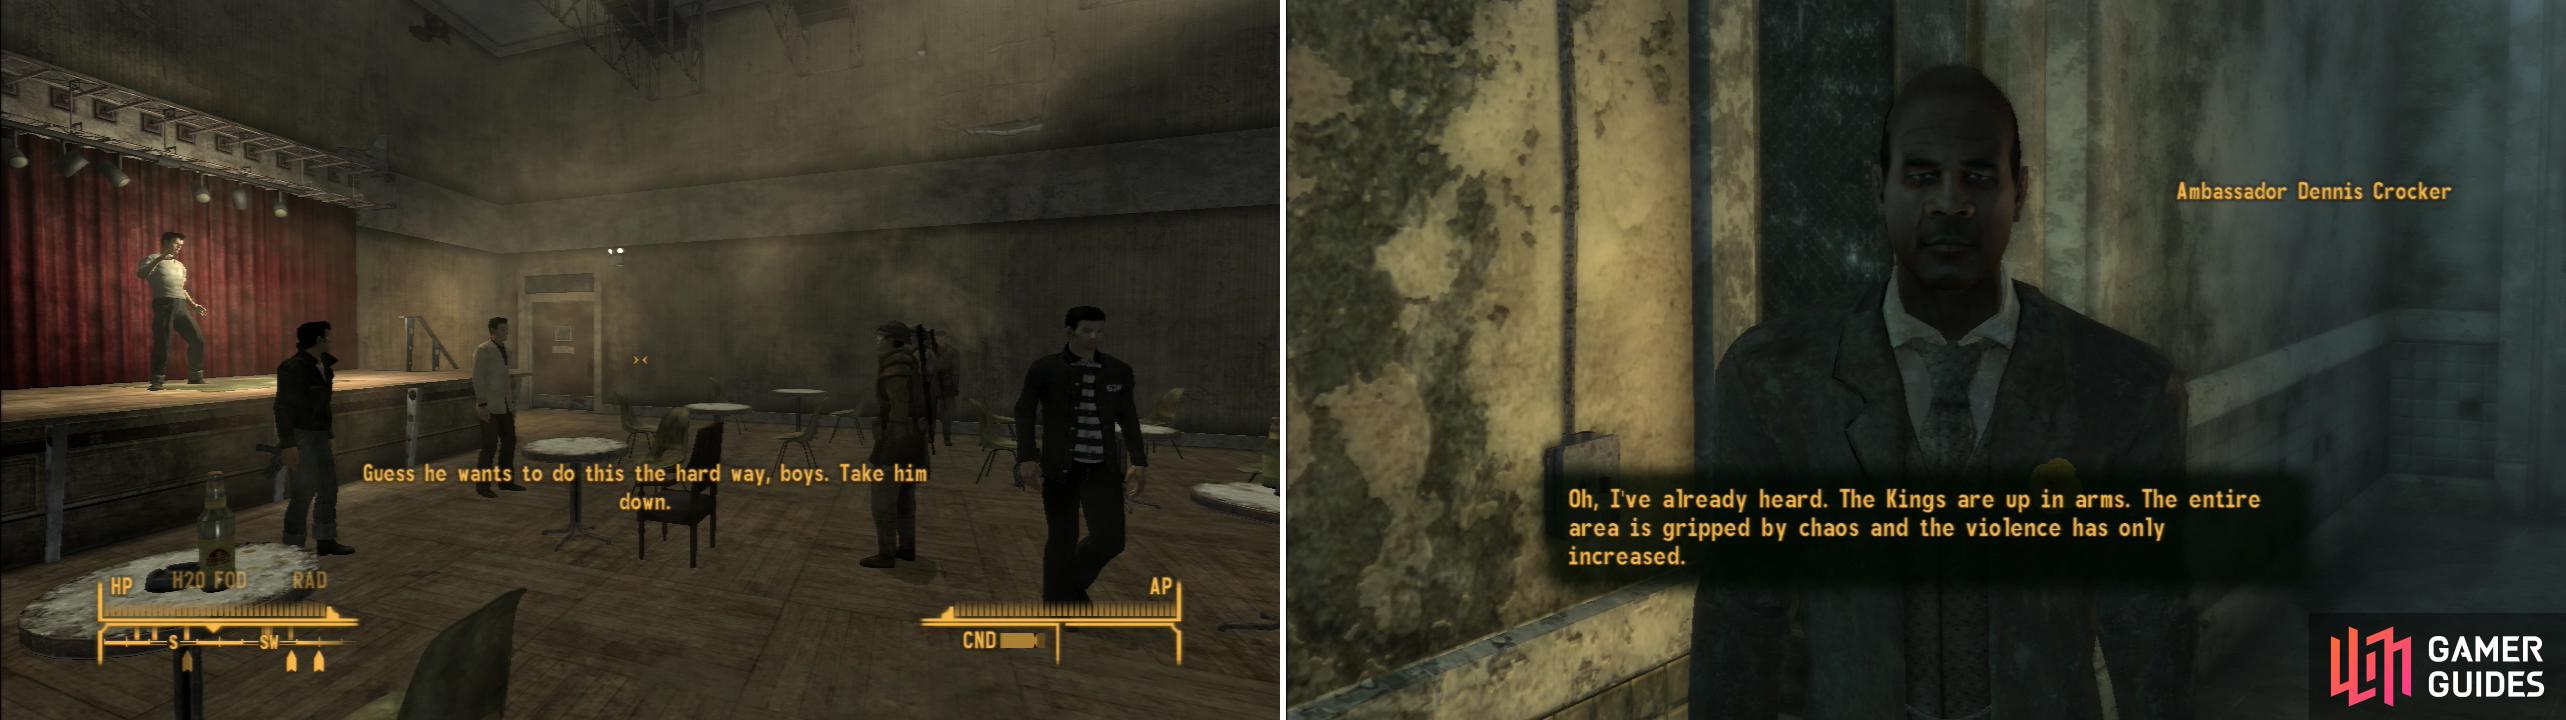 If you bring NCR Troopers into Freeside, violence is inevitable (left). If you botch the situation with The Kings, Ambassador Crocker will not be pleased (right).